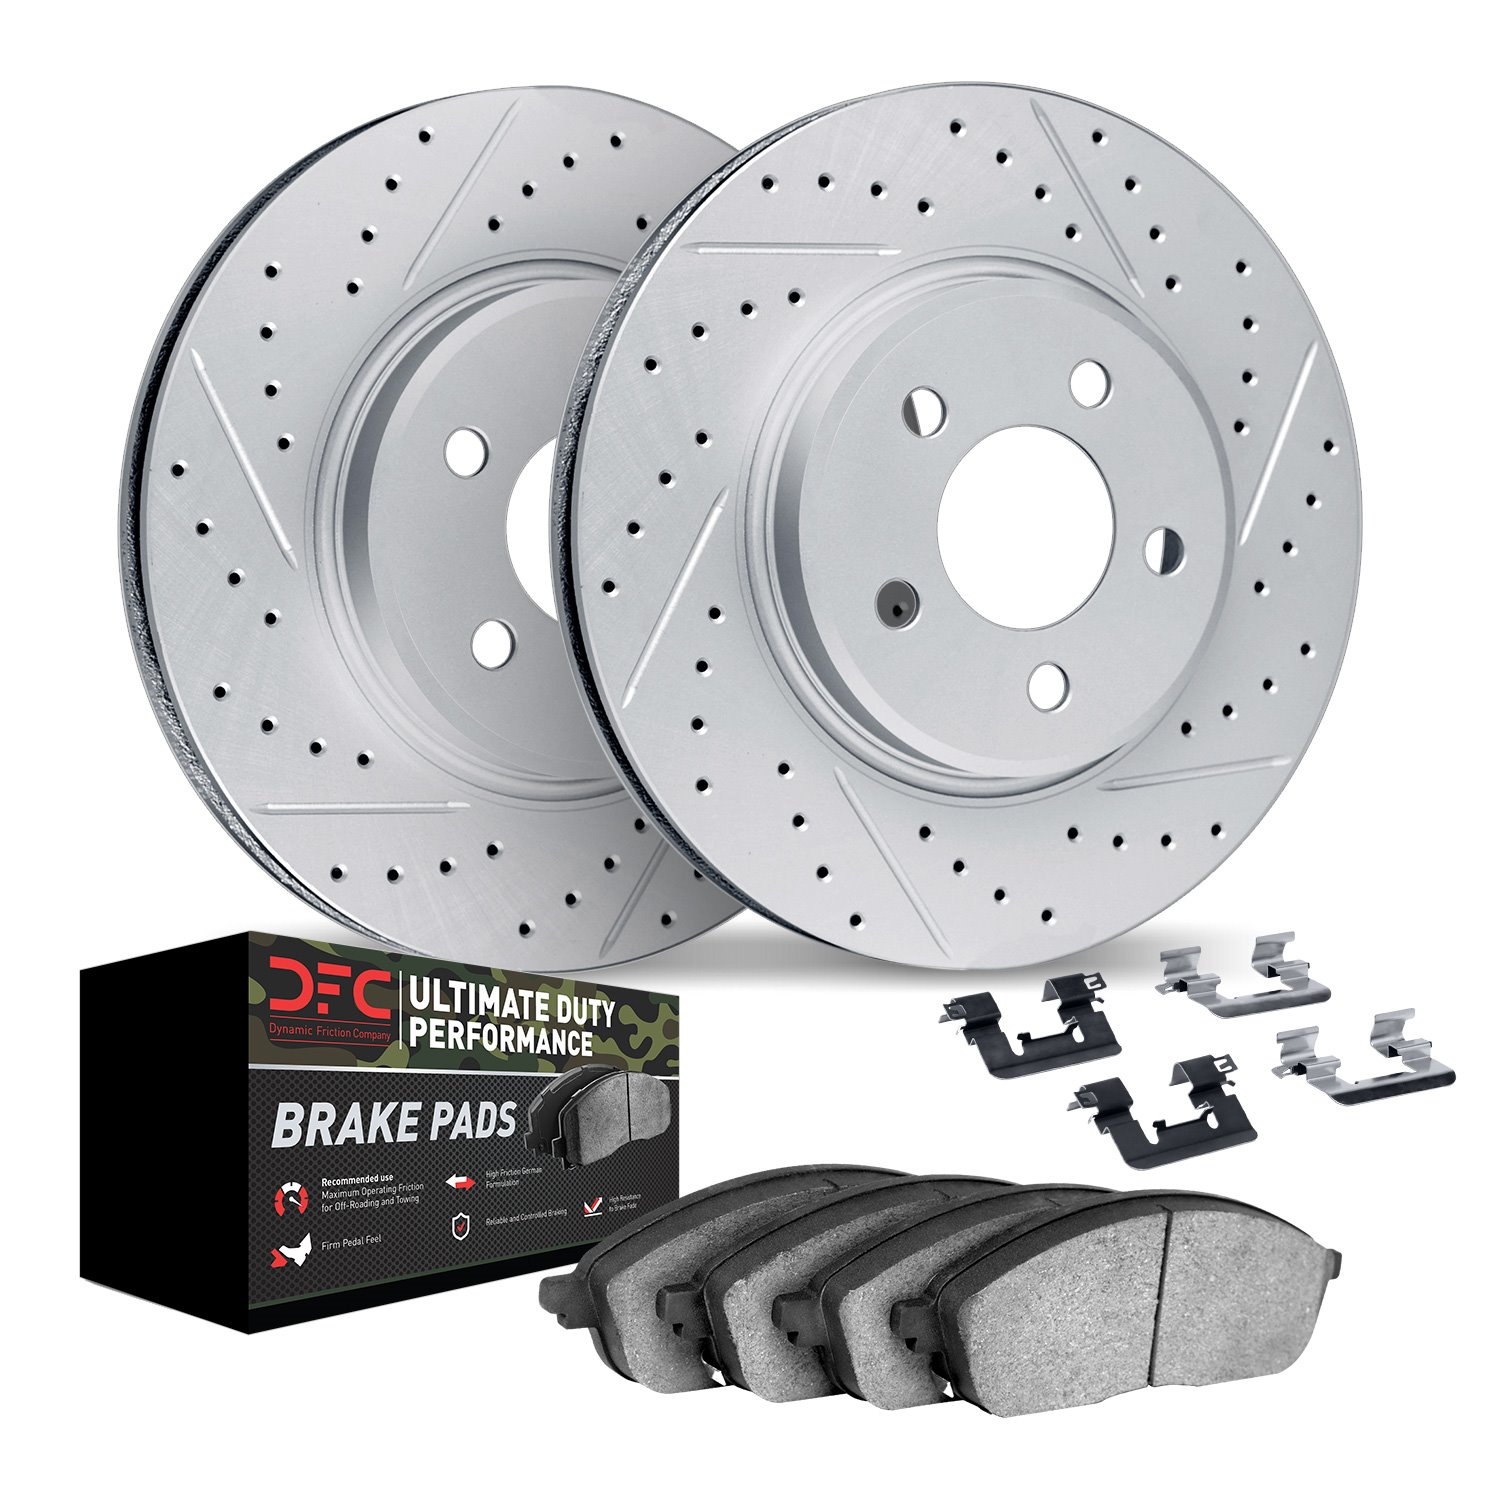 2412-54002 Geoperformance Drilled/Slotted Brake Rotors with Ultimate-Duty Brake Pads Kit & Hardware, 1973-1985 Ford/Lincoln/Merc